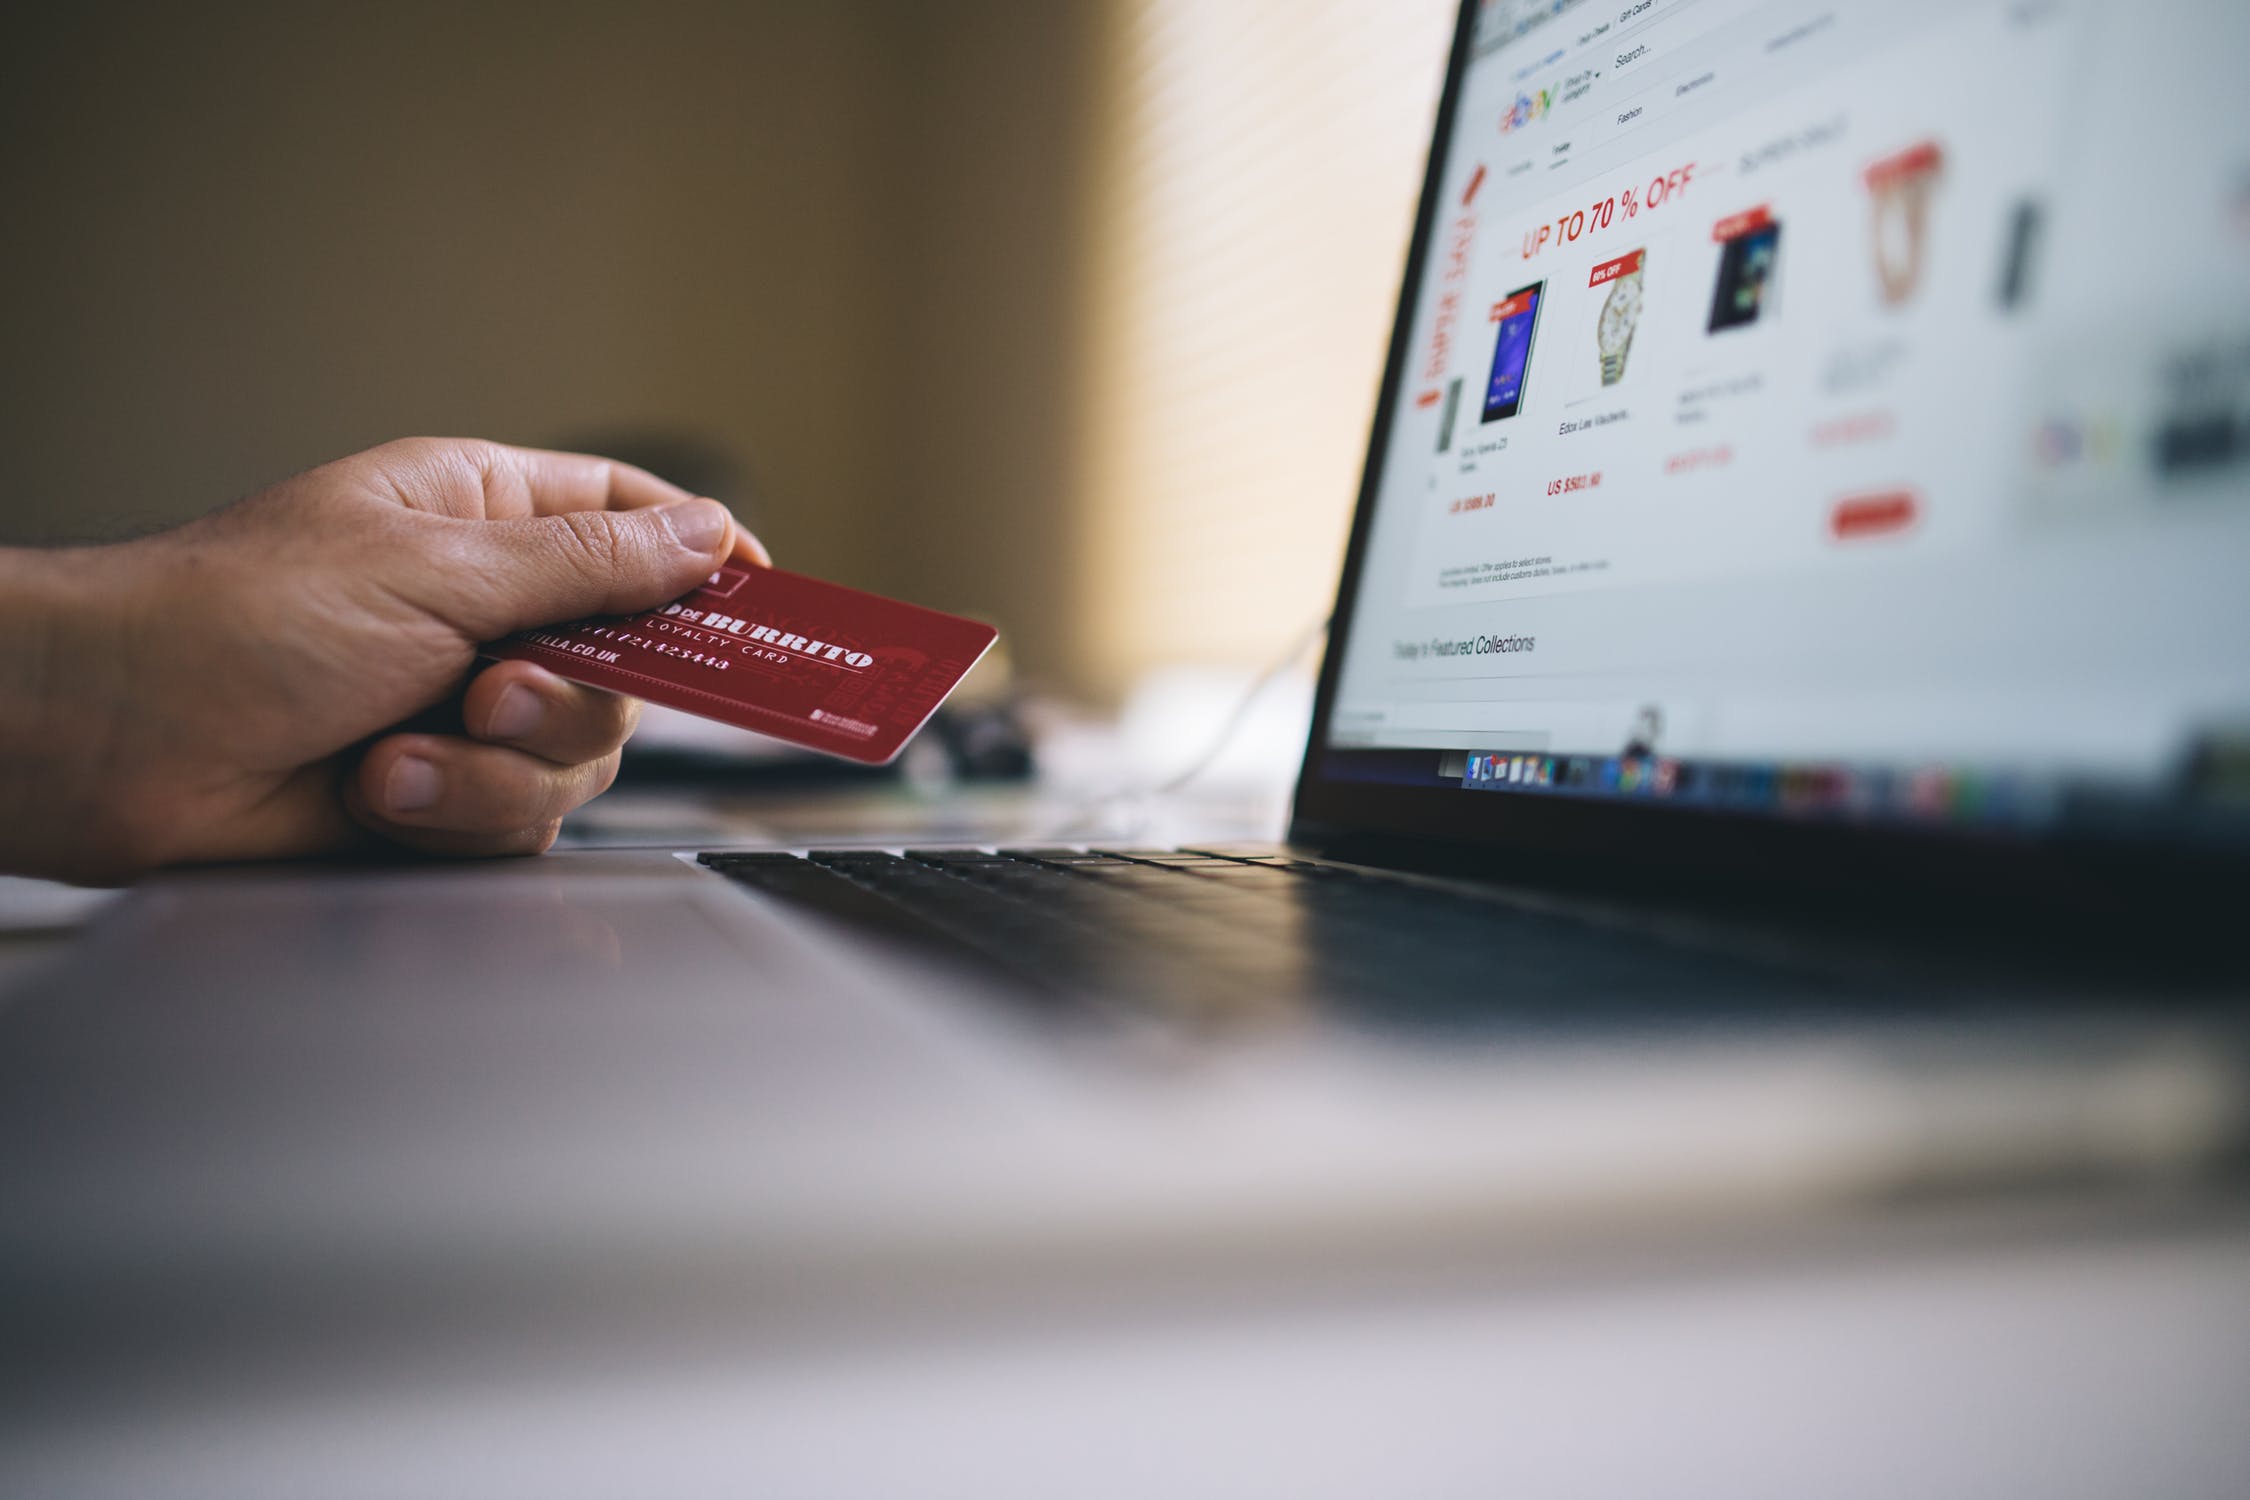 A close-up of a person's hand holding a red credit card next to a laptop with an online shopping site open, indicating an online transaction in progress.